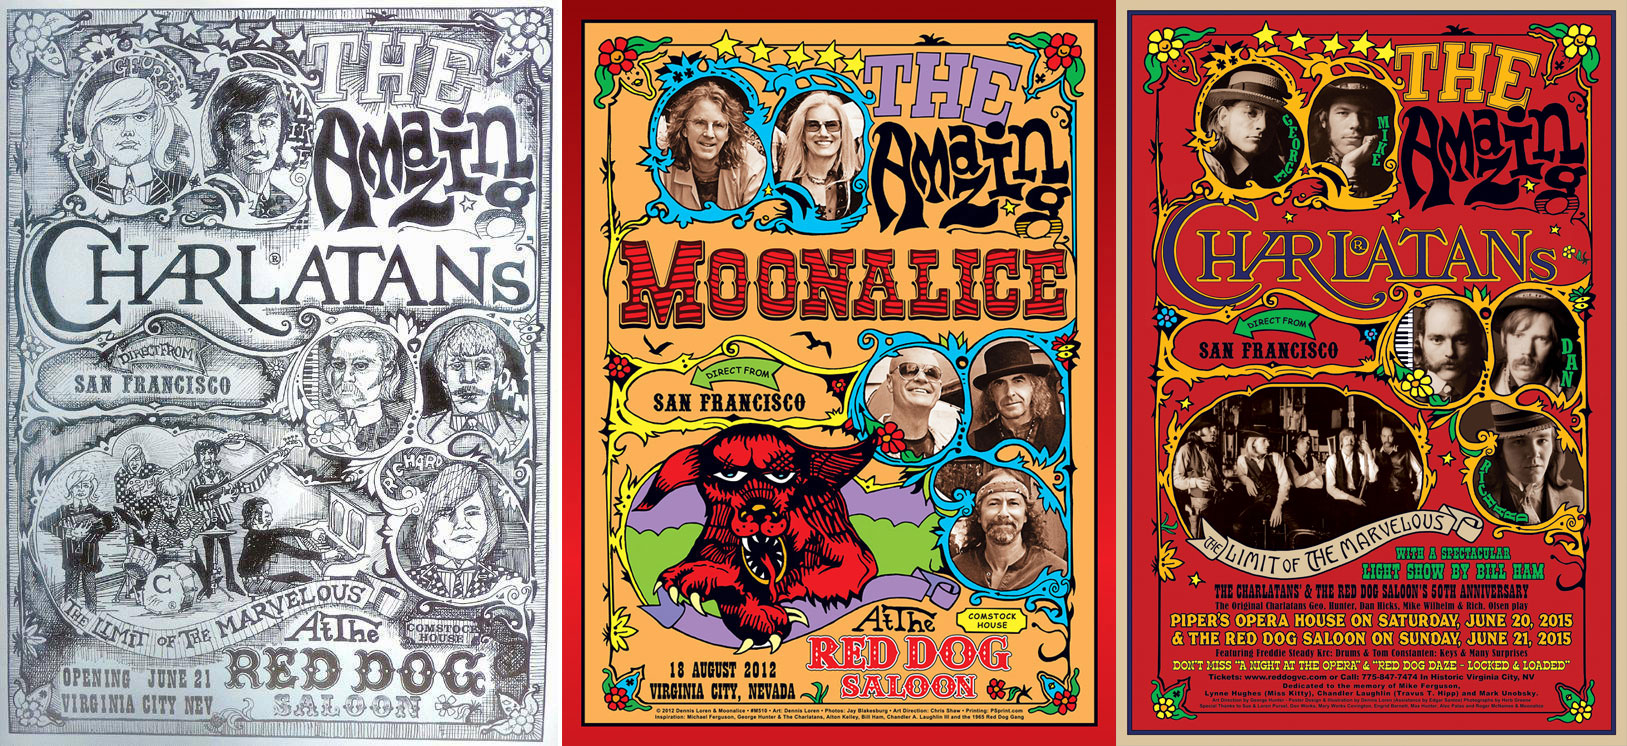 The Charlatans' Seed, Moonalice and 50th anniversary rock poster by Dennis Loren